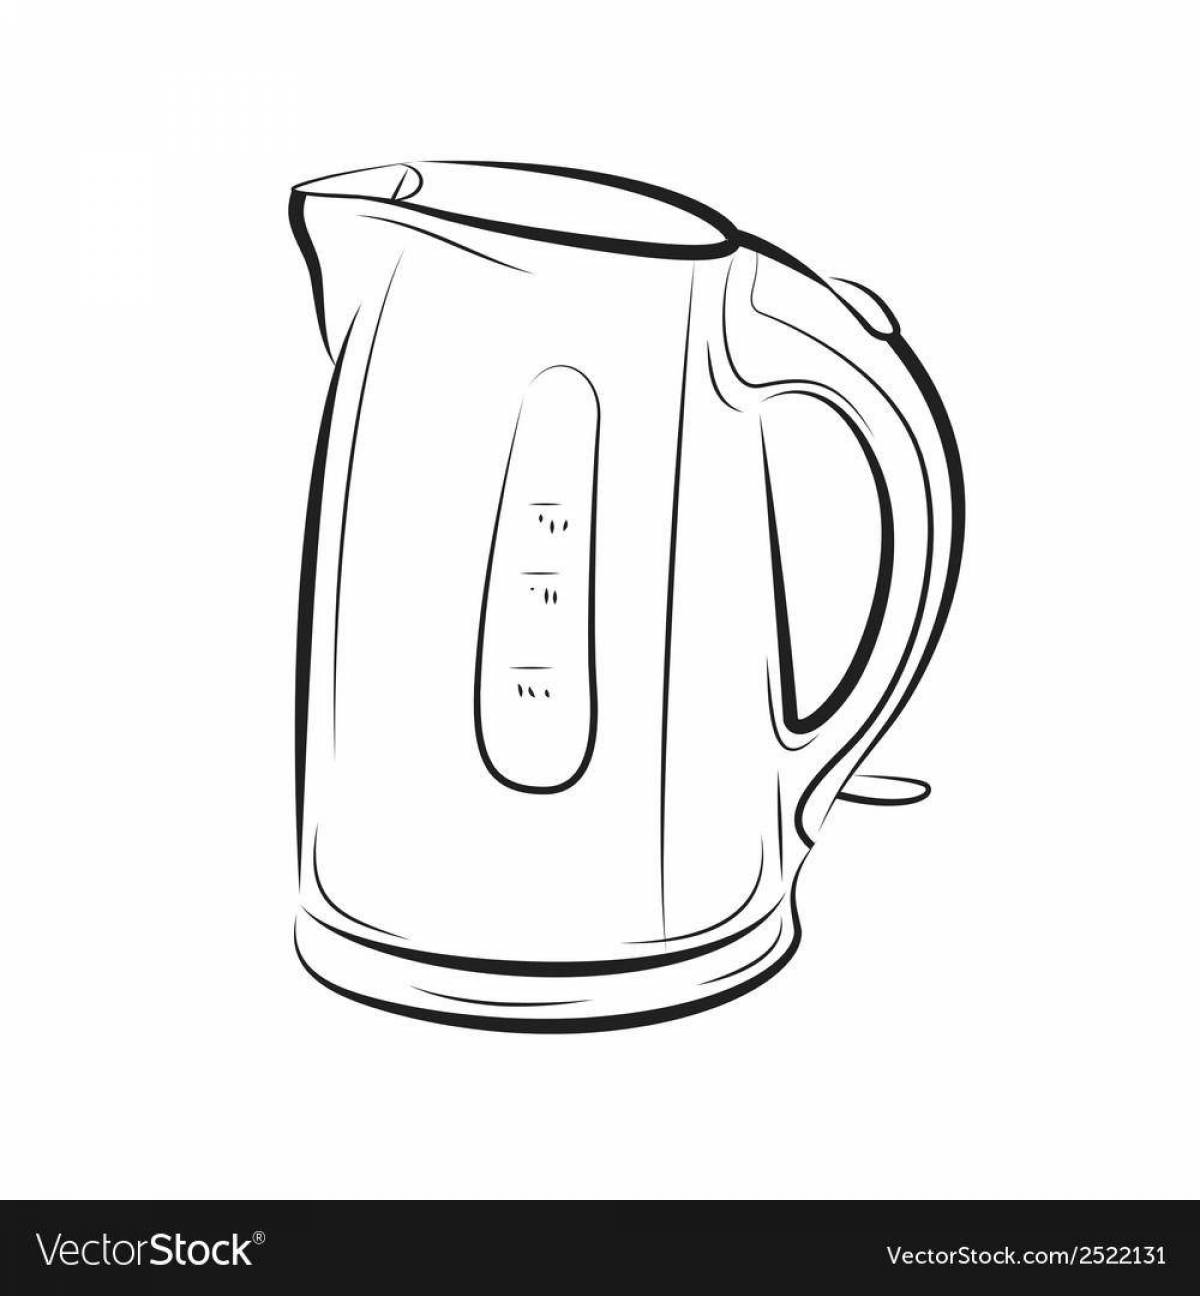 Sweet electric kettle coloring for preschoolers